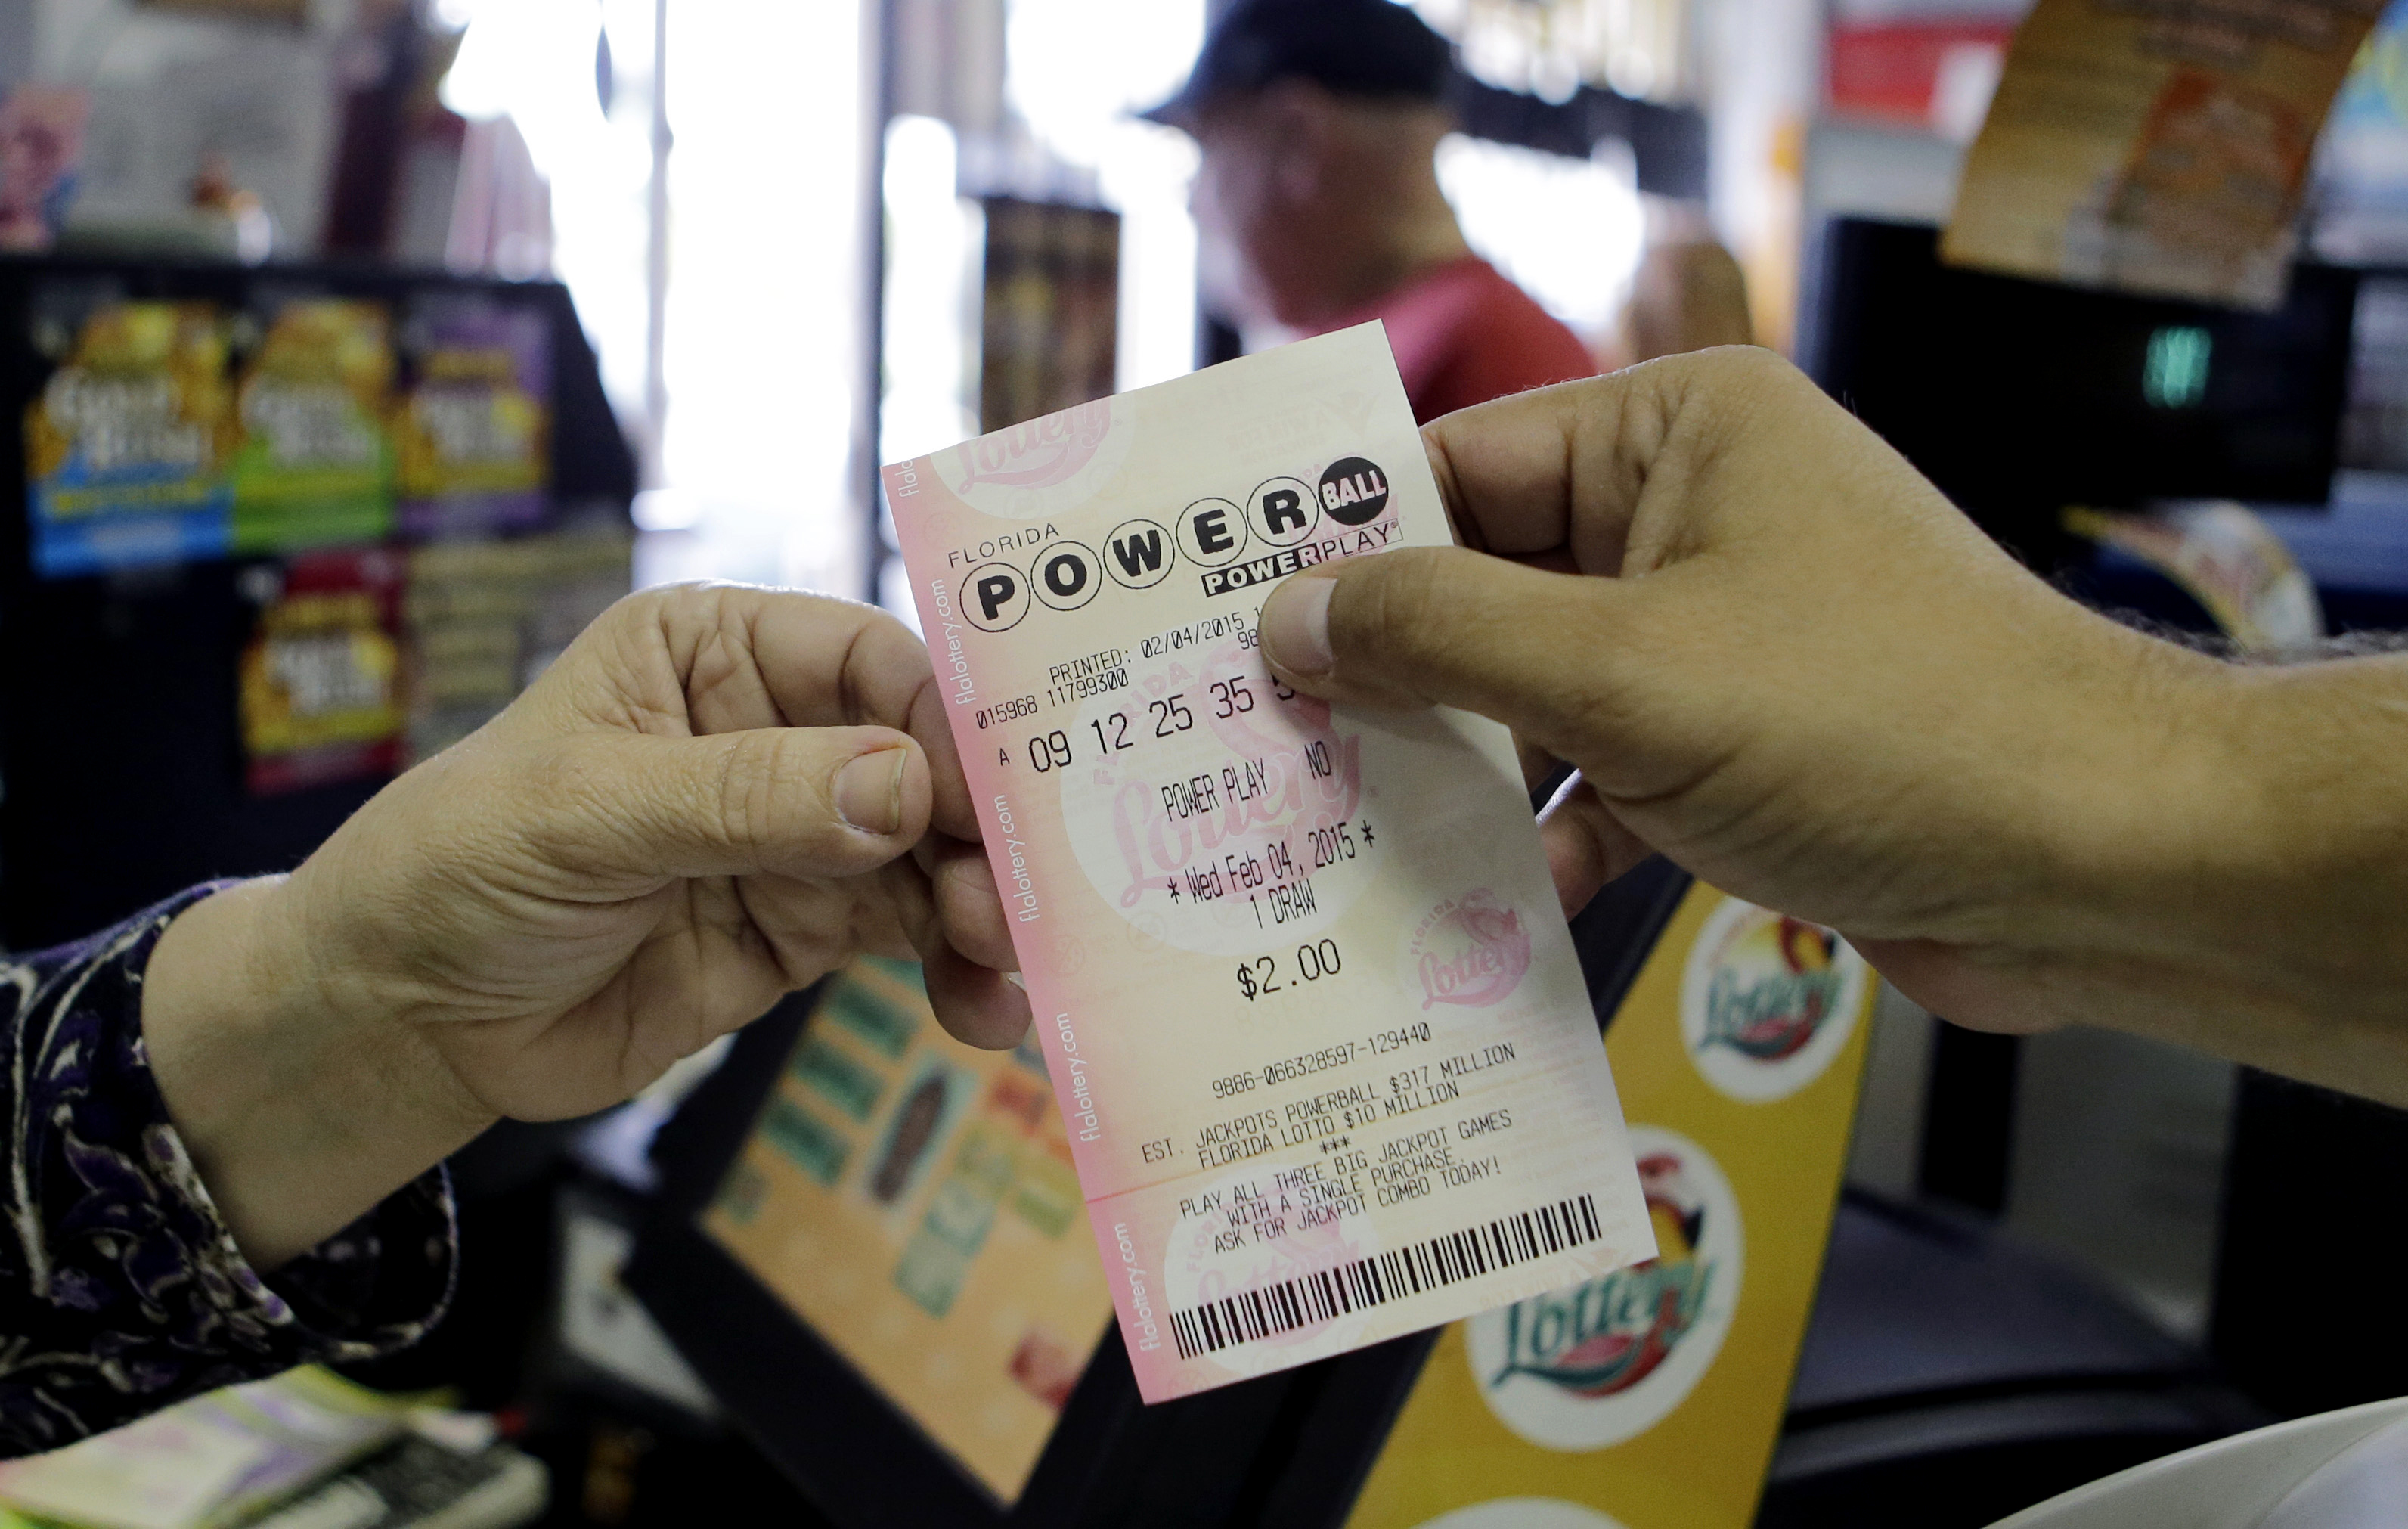 A store clerk hands a customer his Powerball ticket at a local grocery store in Hialeah, Fla., Wednesday, Feb. 4, 2015 (Alan Diaz—AP)